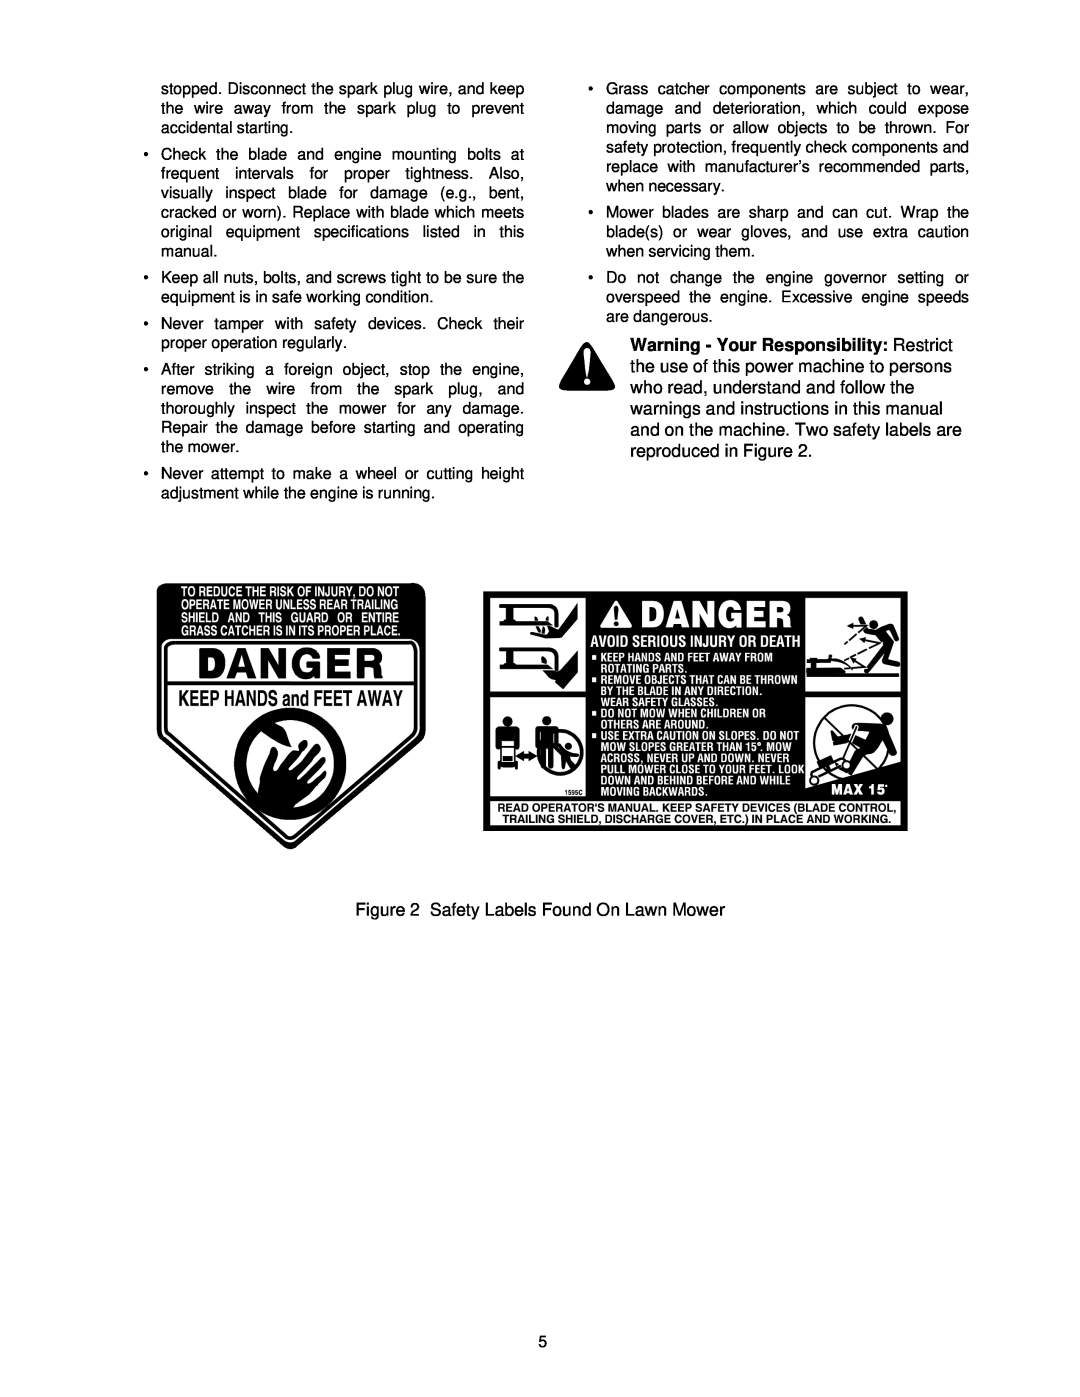 Yard Machines 580 Series manual Safety Labels Found On Lawn Mower 